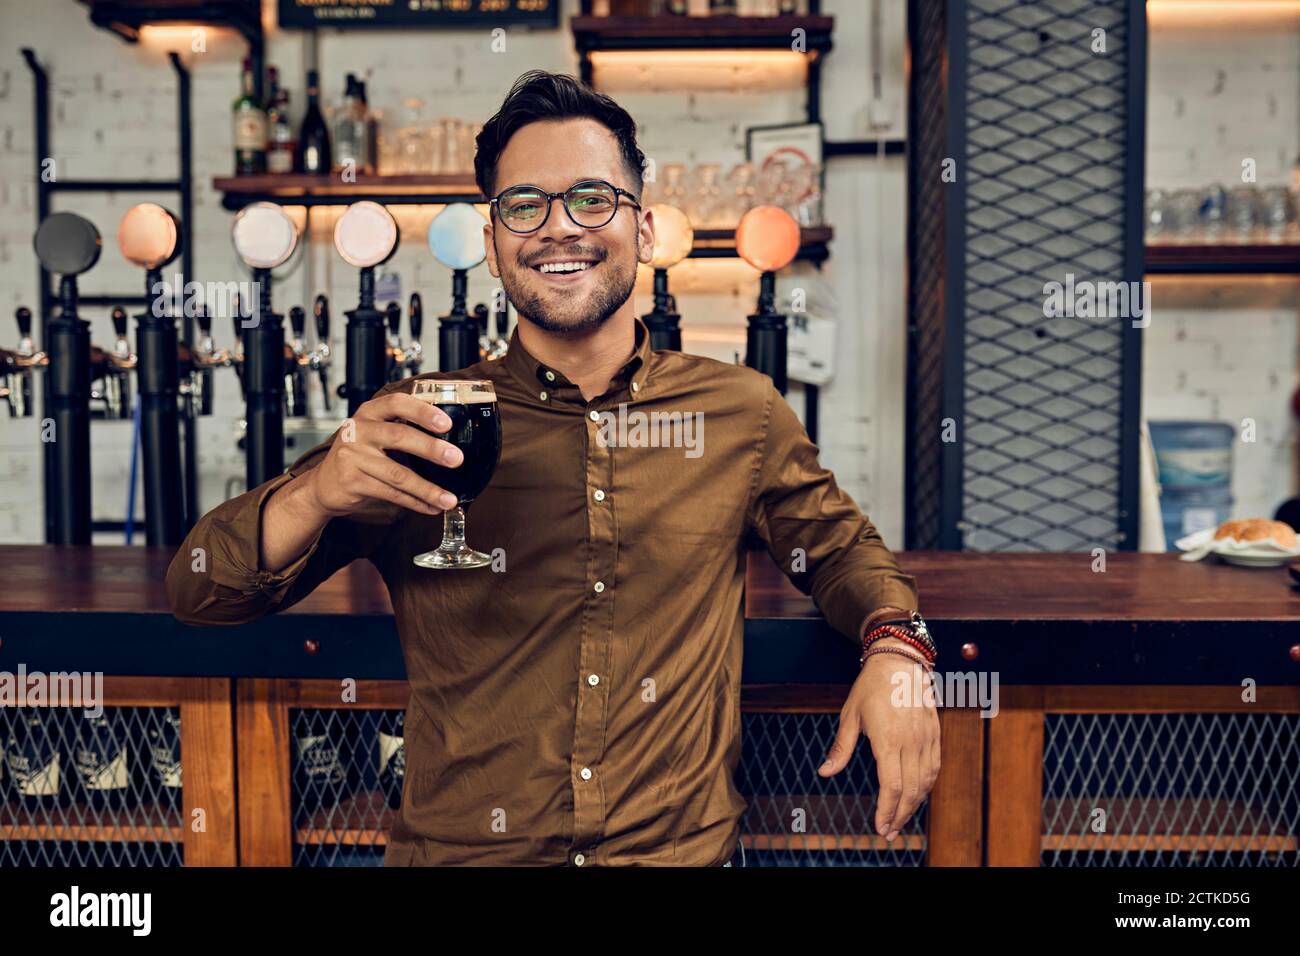 Portrait of a smiling man raising his beer glass in a pub Stock Photo